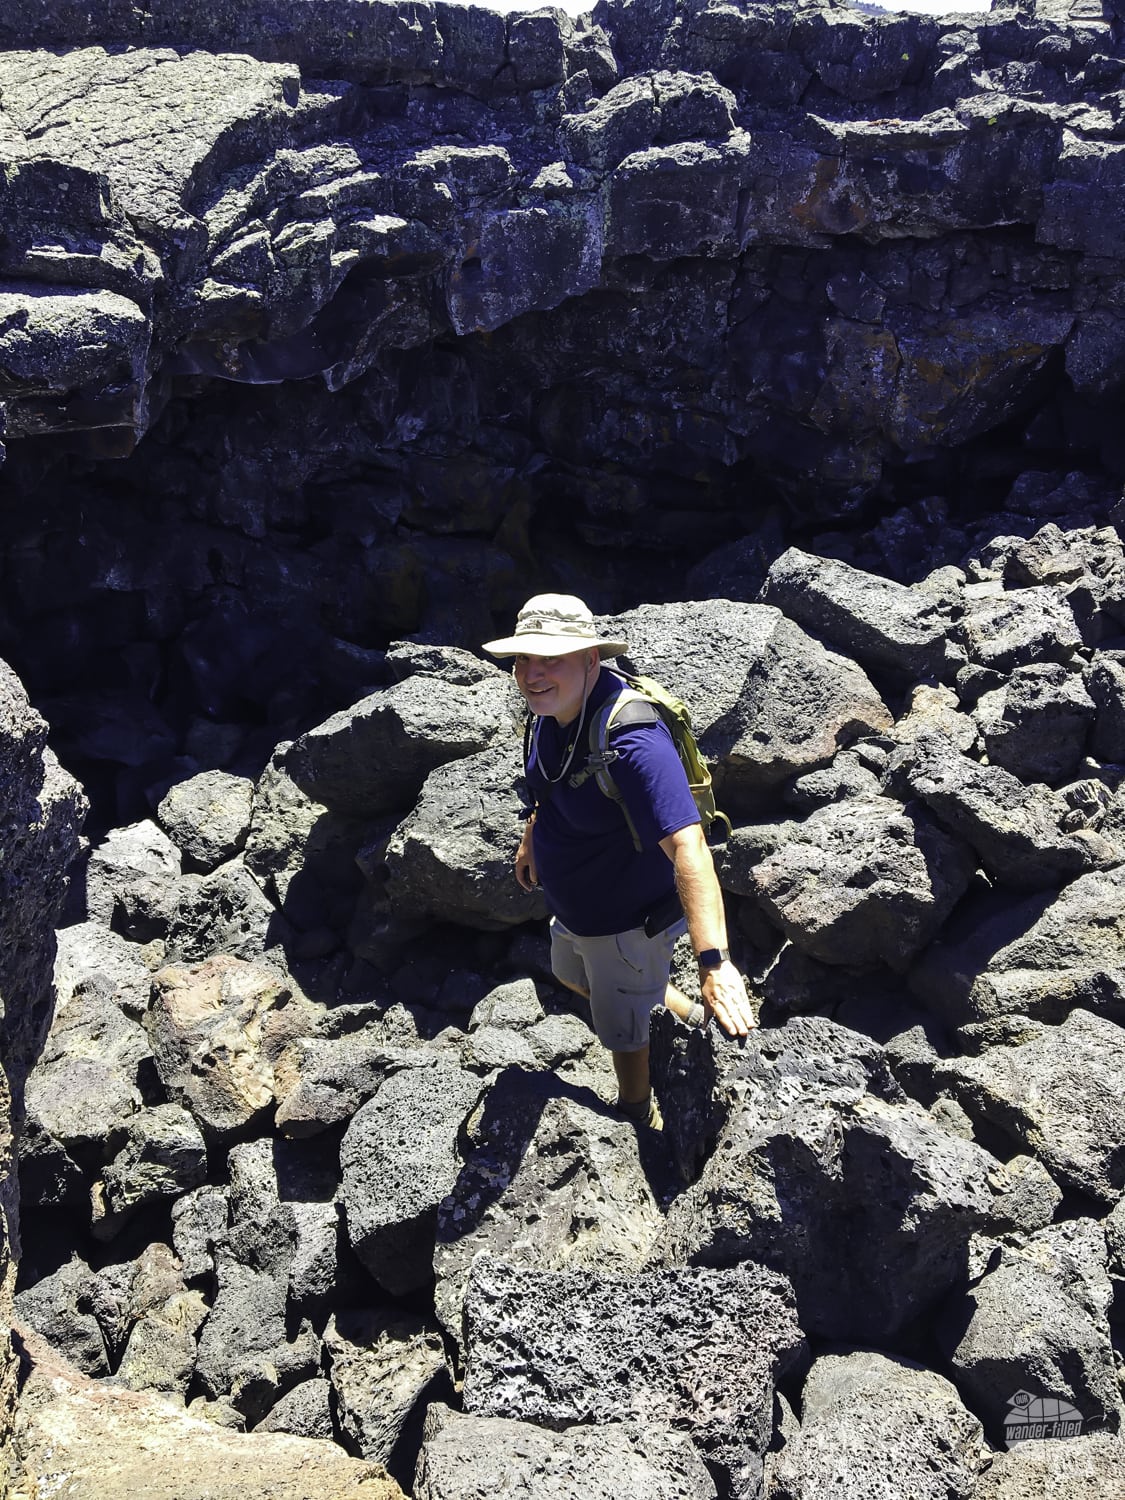 Getting into the caves of Craters of the Moon National Monument